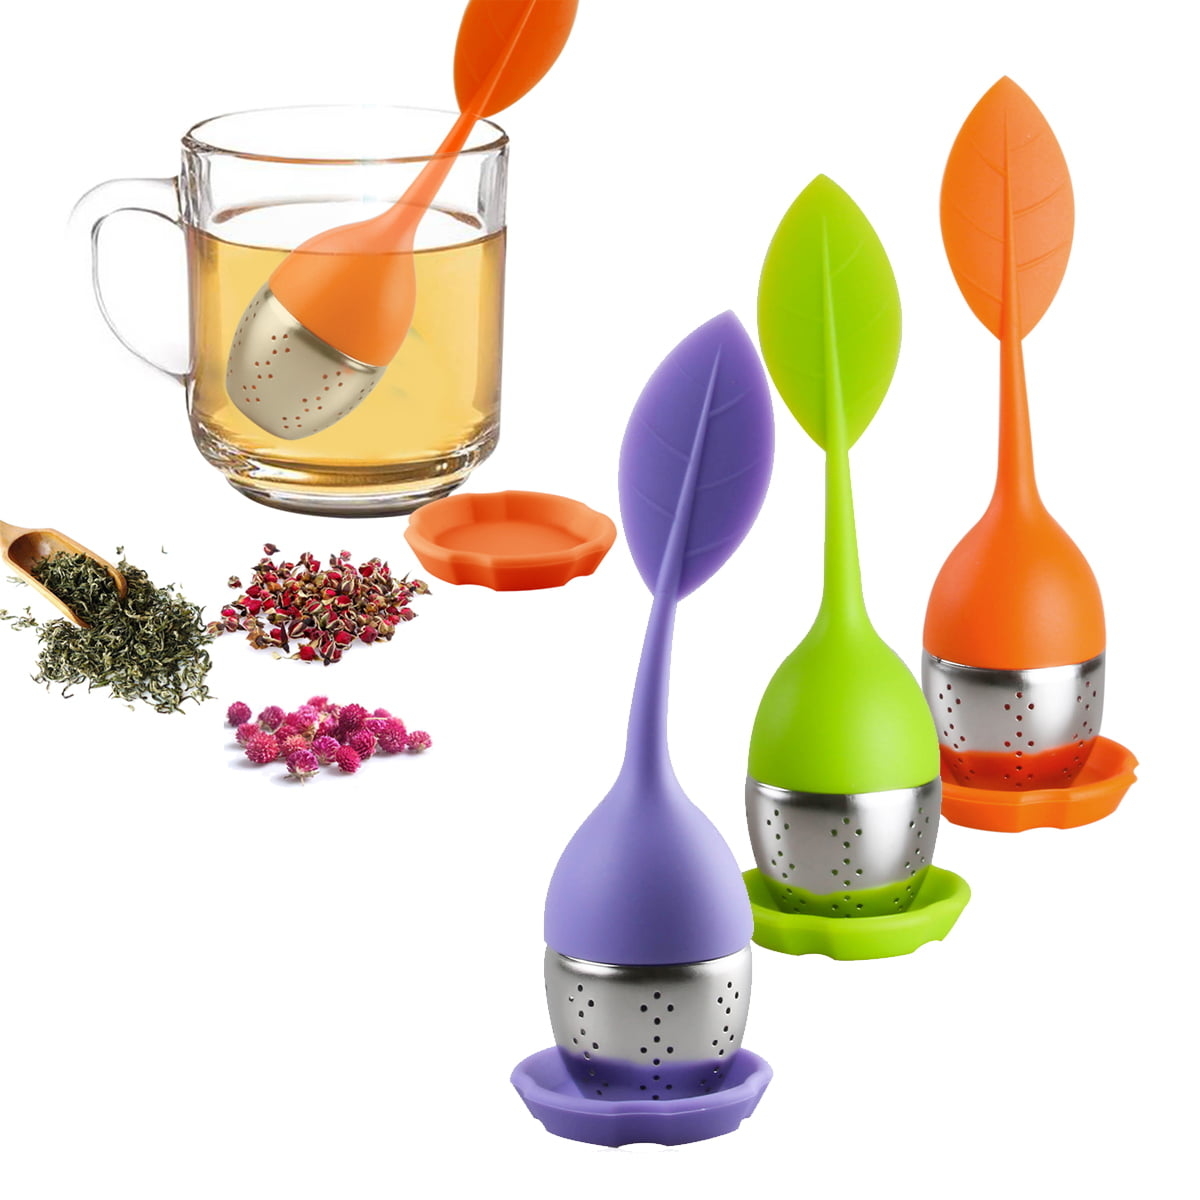 three silicone tea infusers on a white background, placed next to a cup of tea and loose tea leaves